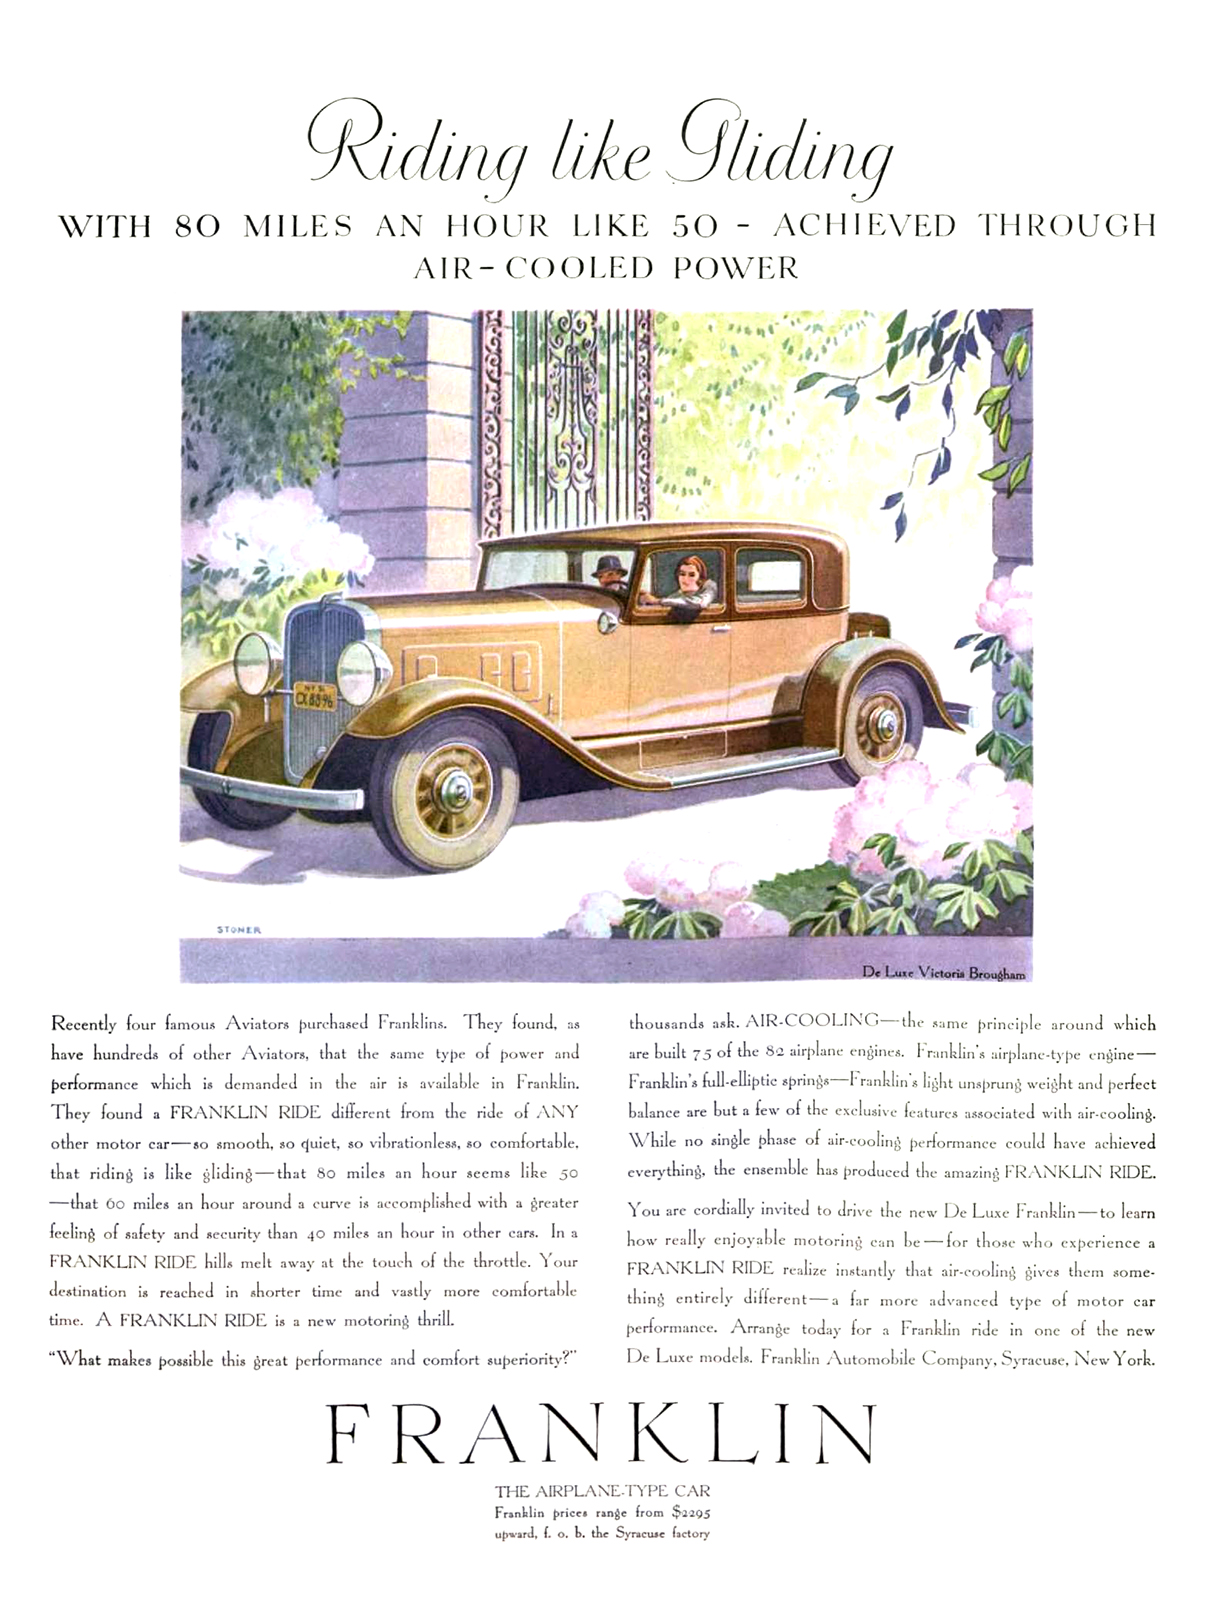 Franklin DeLuxe Victoria Brougham Ad (May, 1931): Riding like Gliding - Illustrated by Elmer Stoner